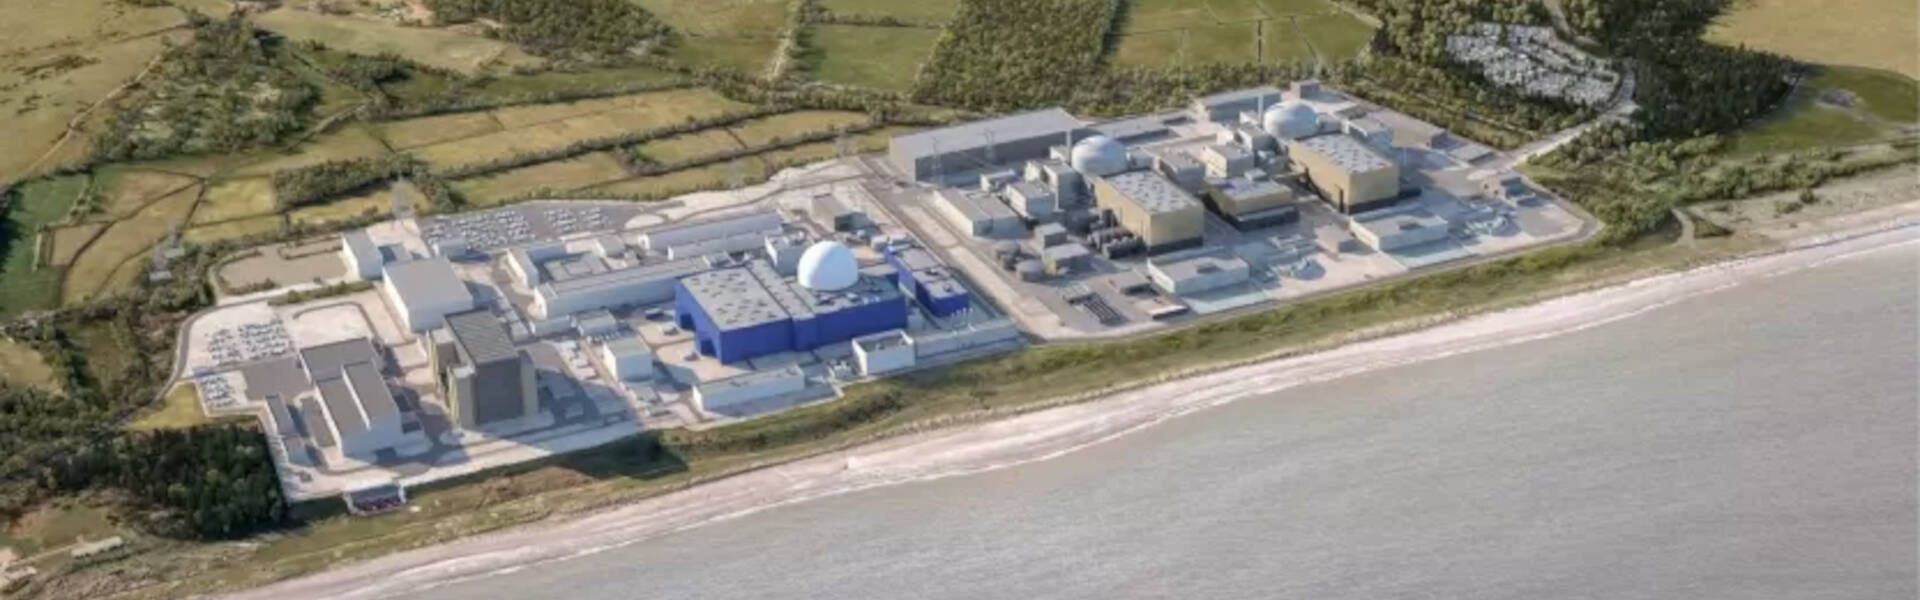 Ofgem: Sizewell C costs need to be locked down before construction begins